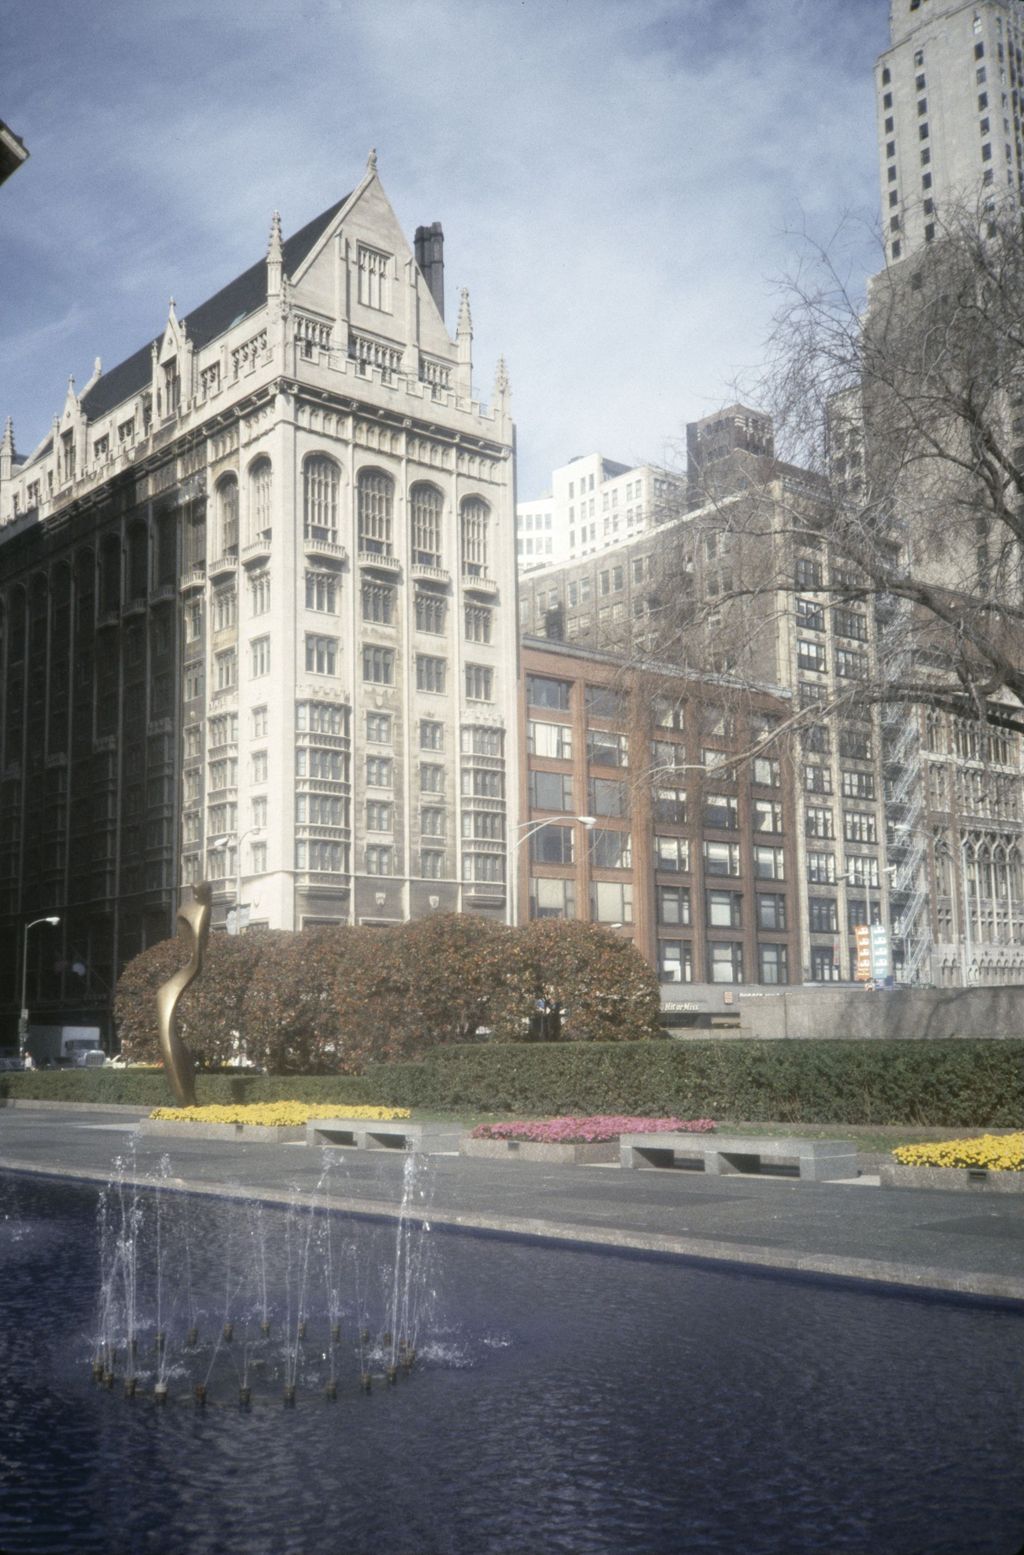 Miniature of University Club of Chicago and Gage Group buildings